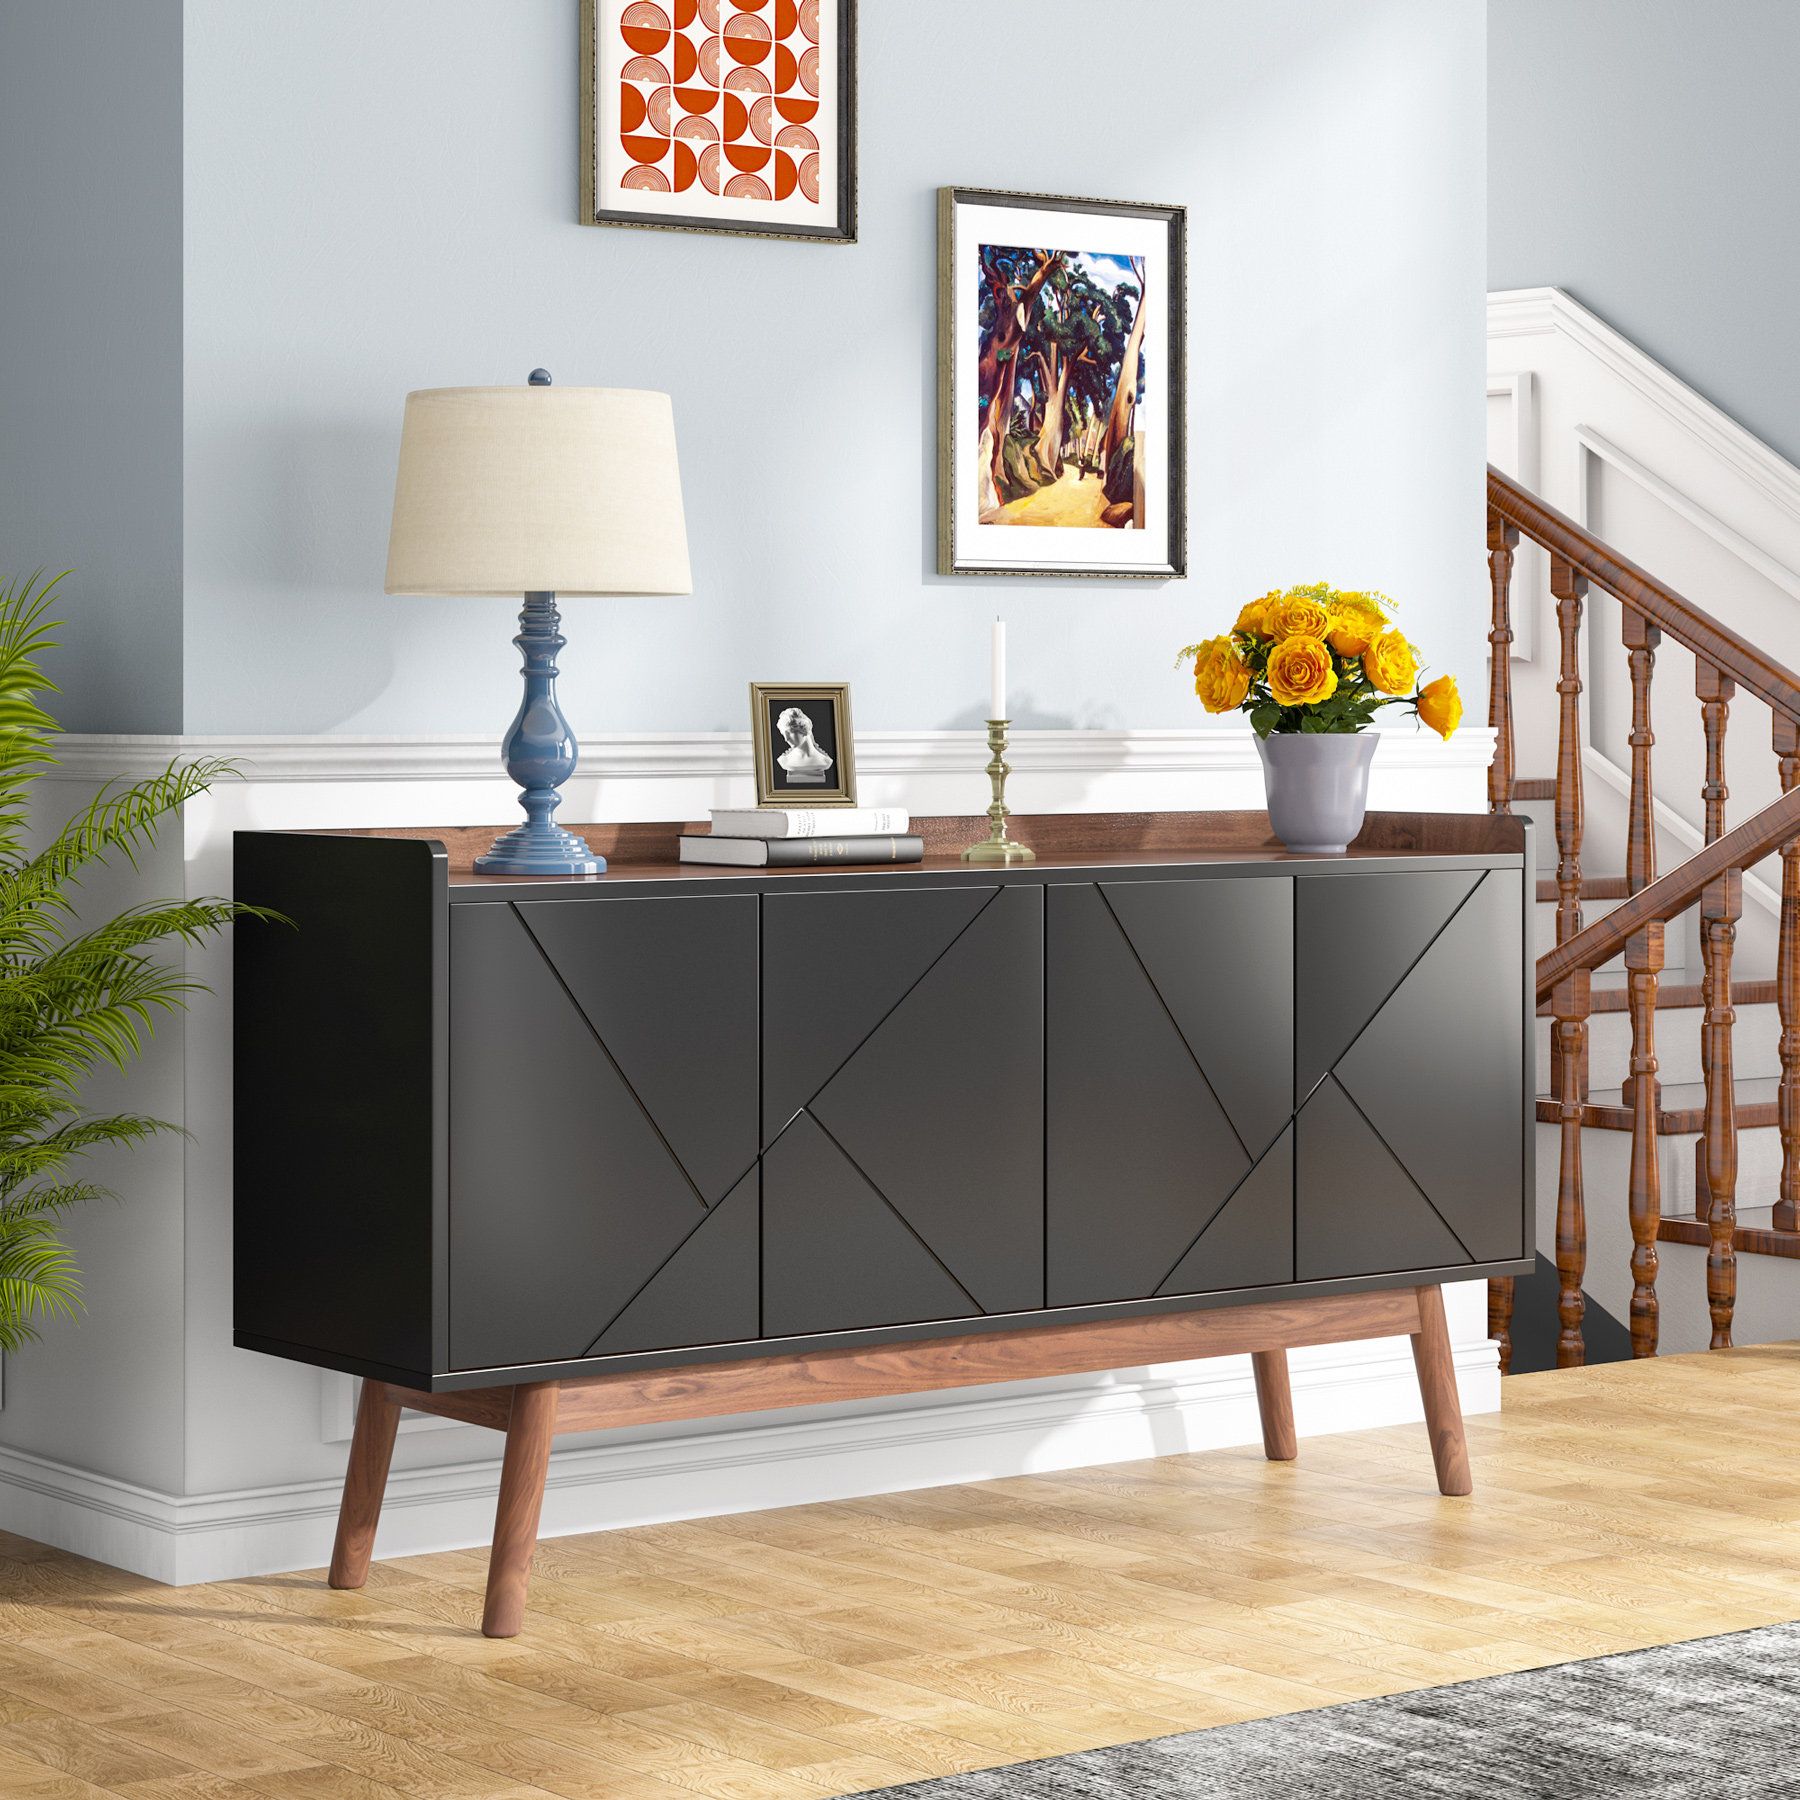 George Oliver Jahdae 55.11'' Sideboard & Reviews | Wayfair Intended For Sideboard Buffet Cabinets (Gallery 13 of 20)